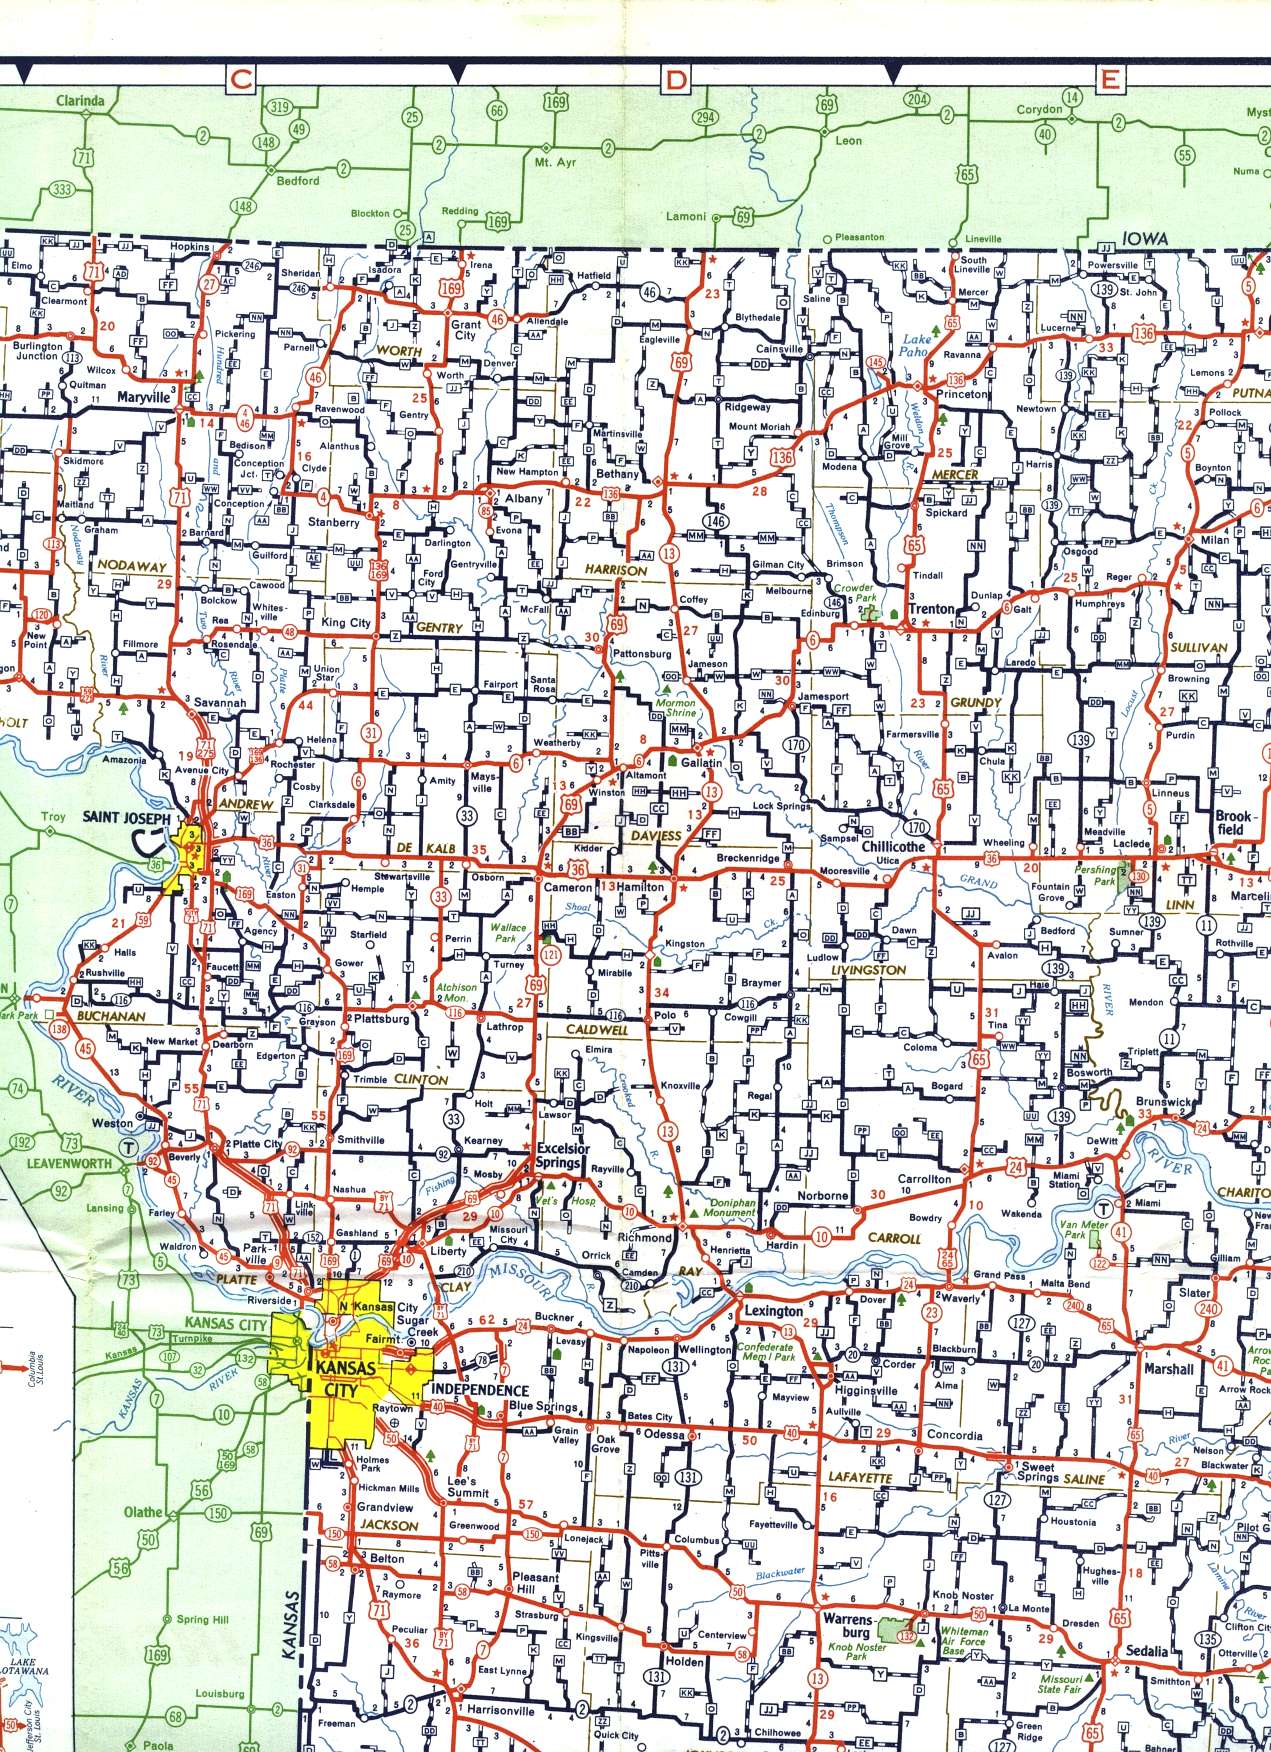 Northwest-central section of Missouri from 1958 official highway map